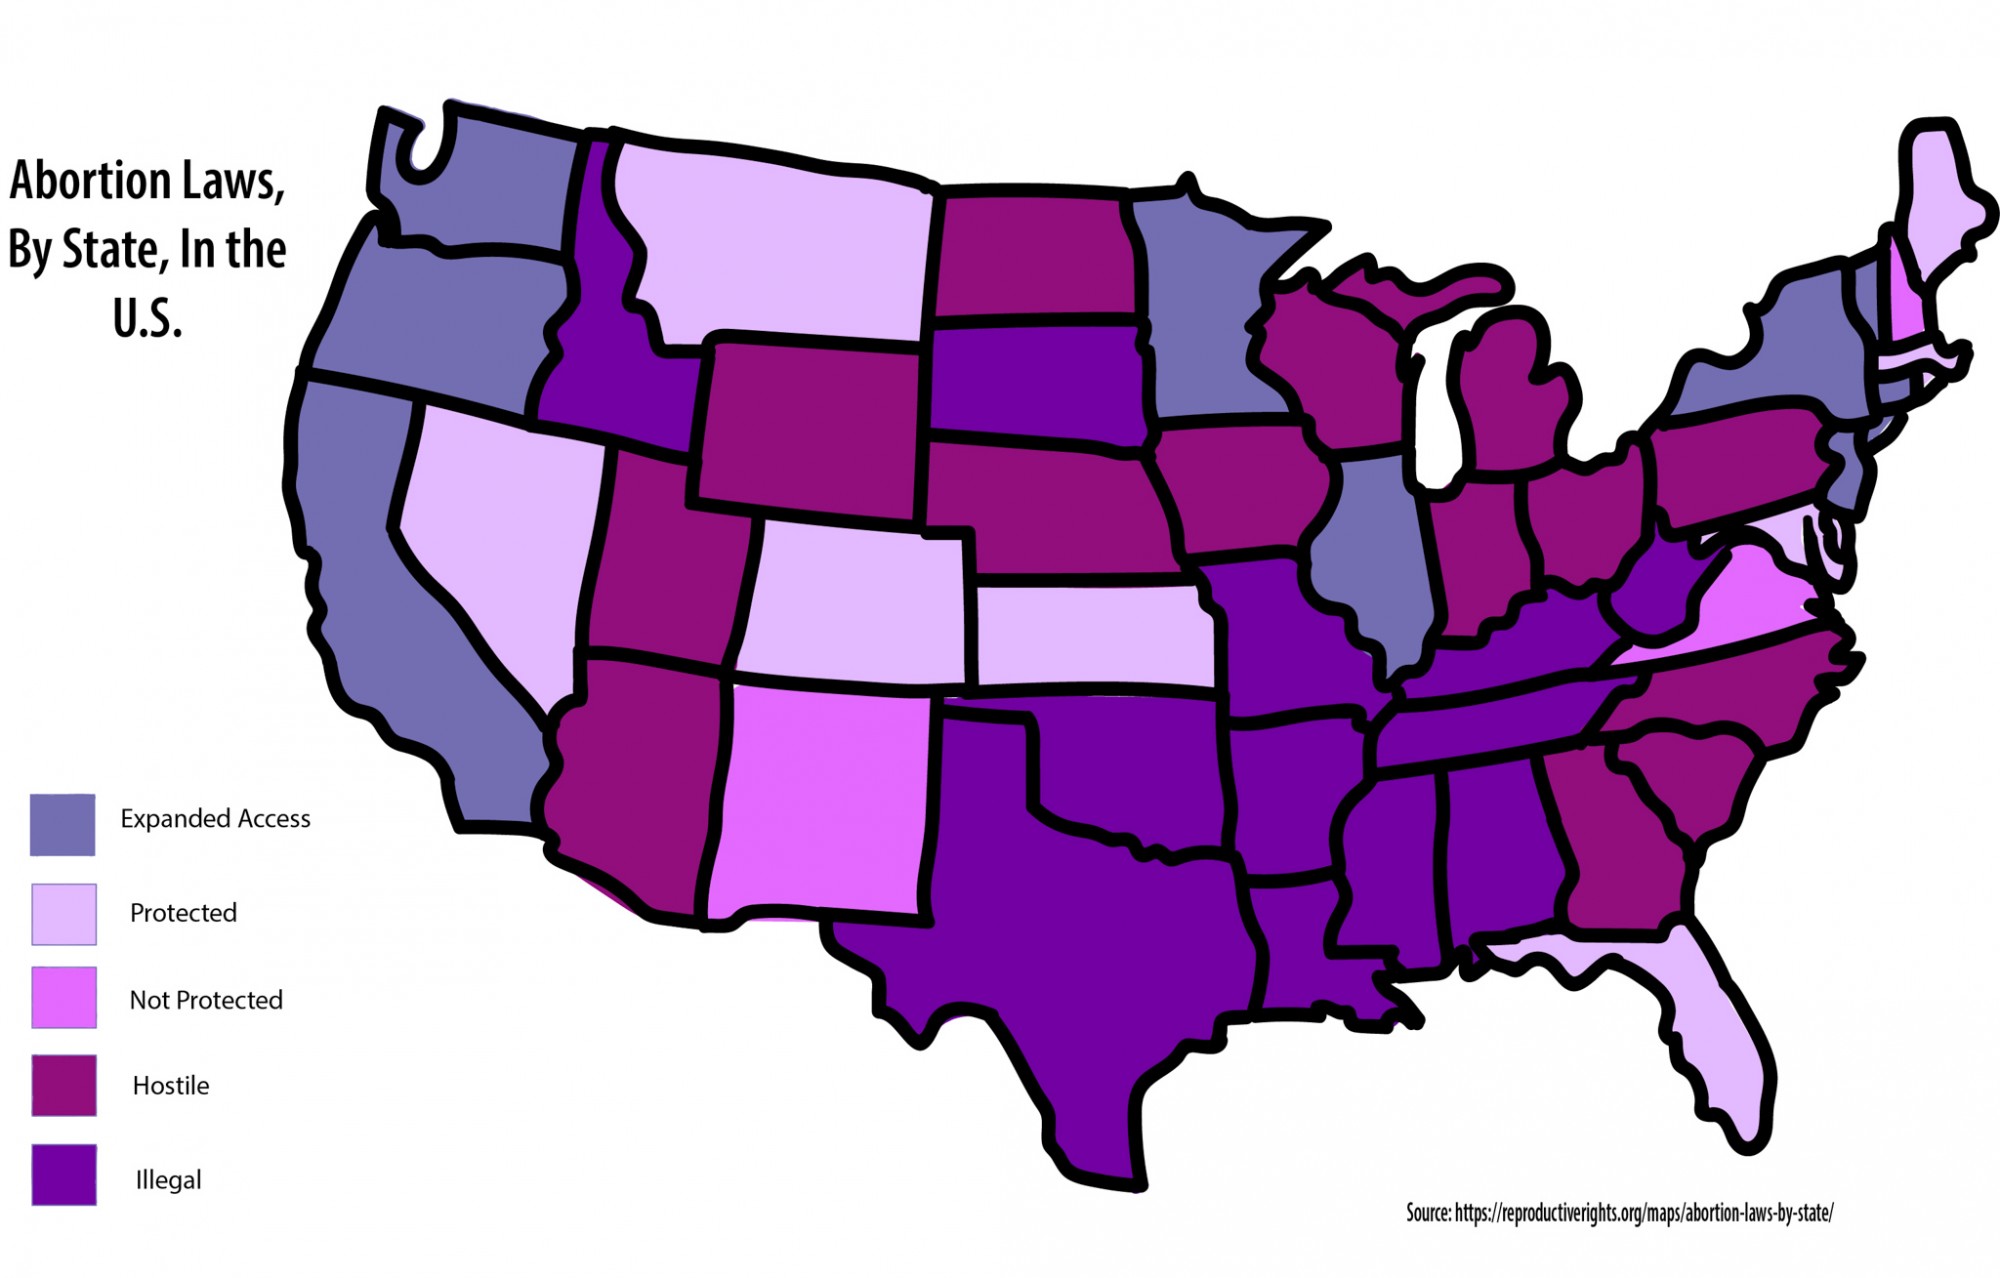 A graphic map of the United States shows which states have banned or restricted abortion.